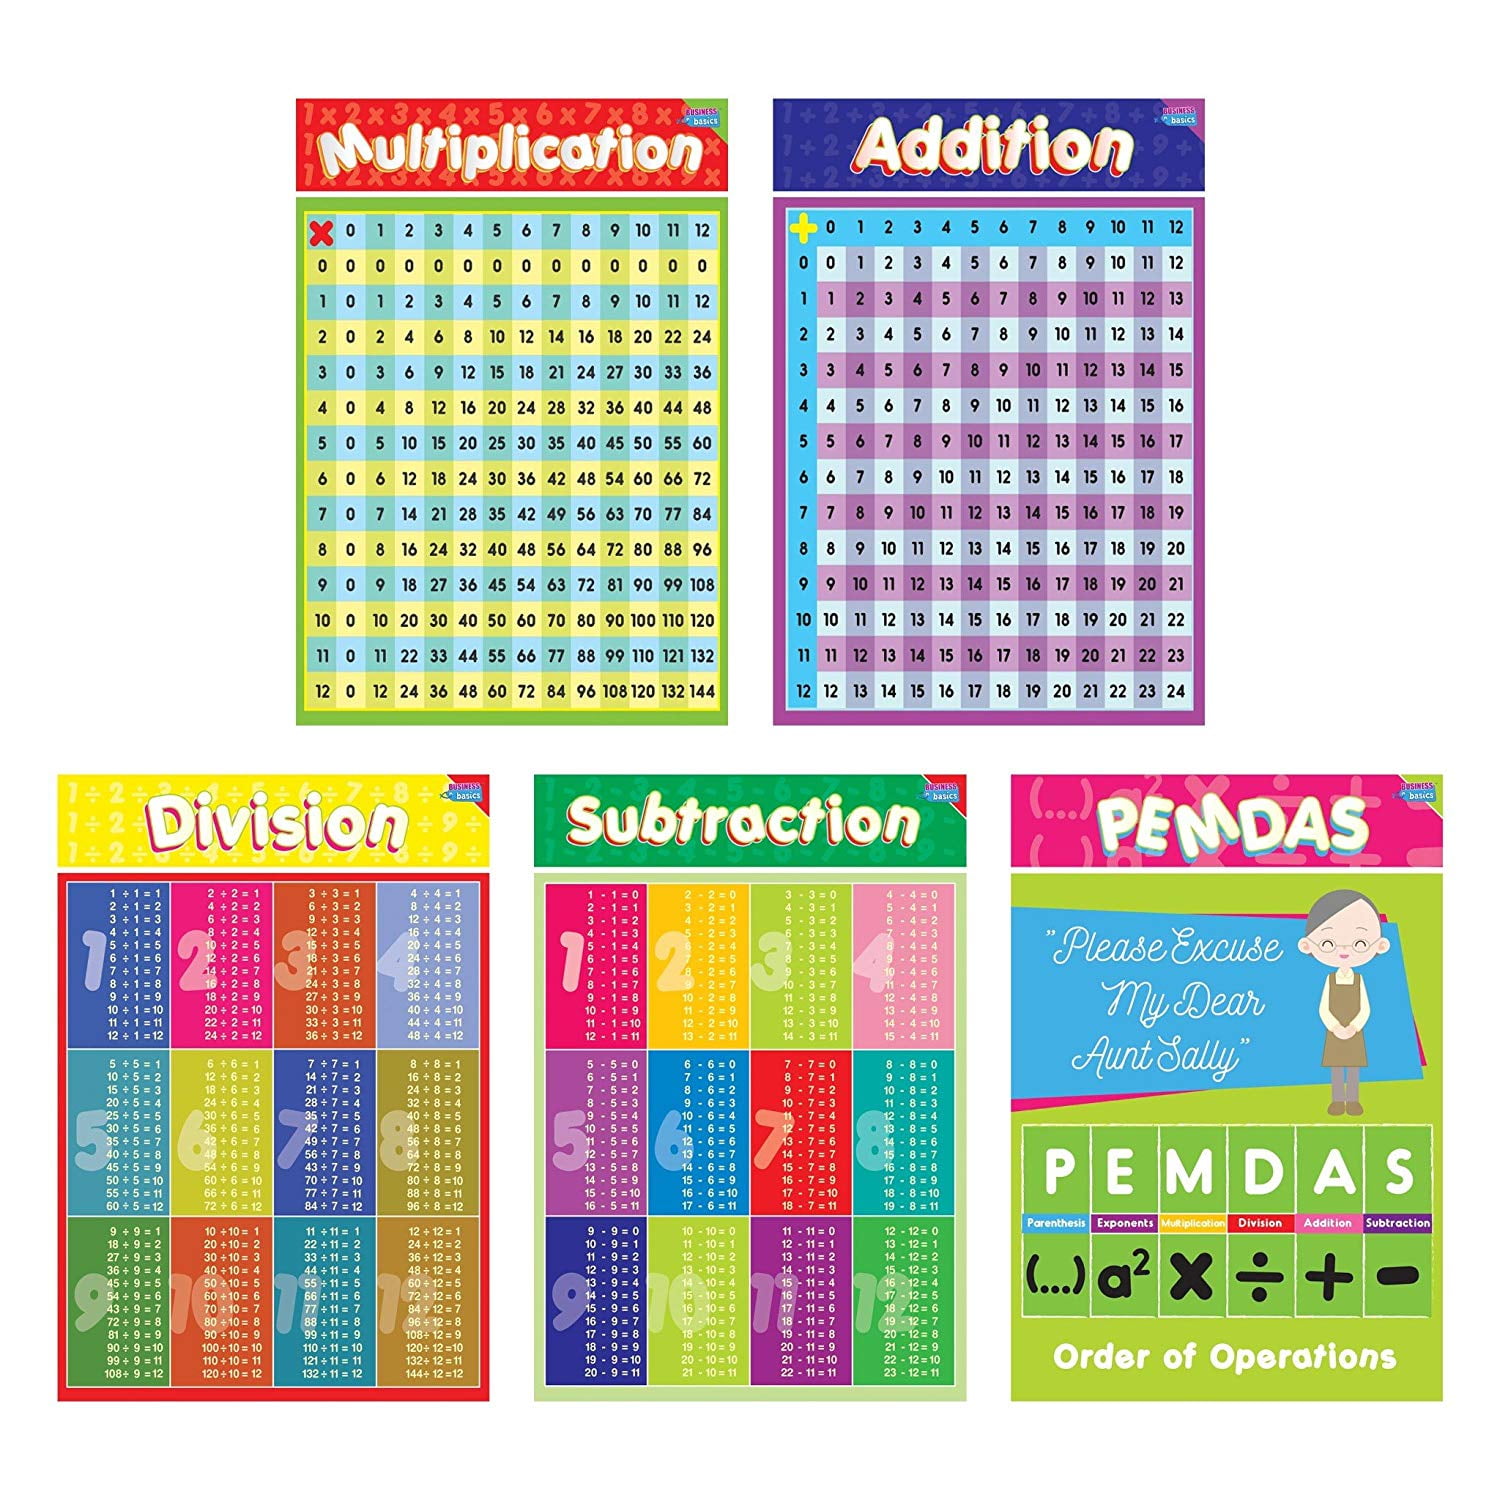 Math Posters for Classroom Decorations, Supplies For Teachers  (4pcs,12x18) - BEAWART M